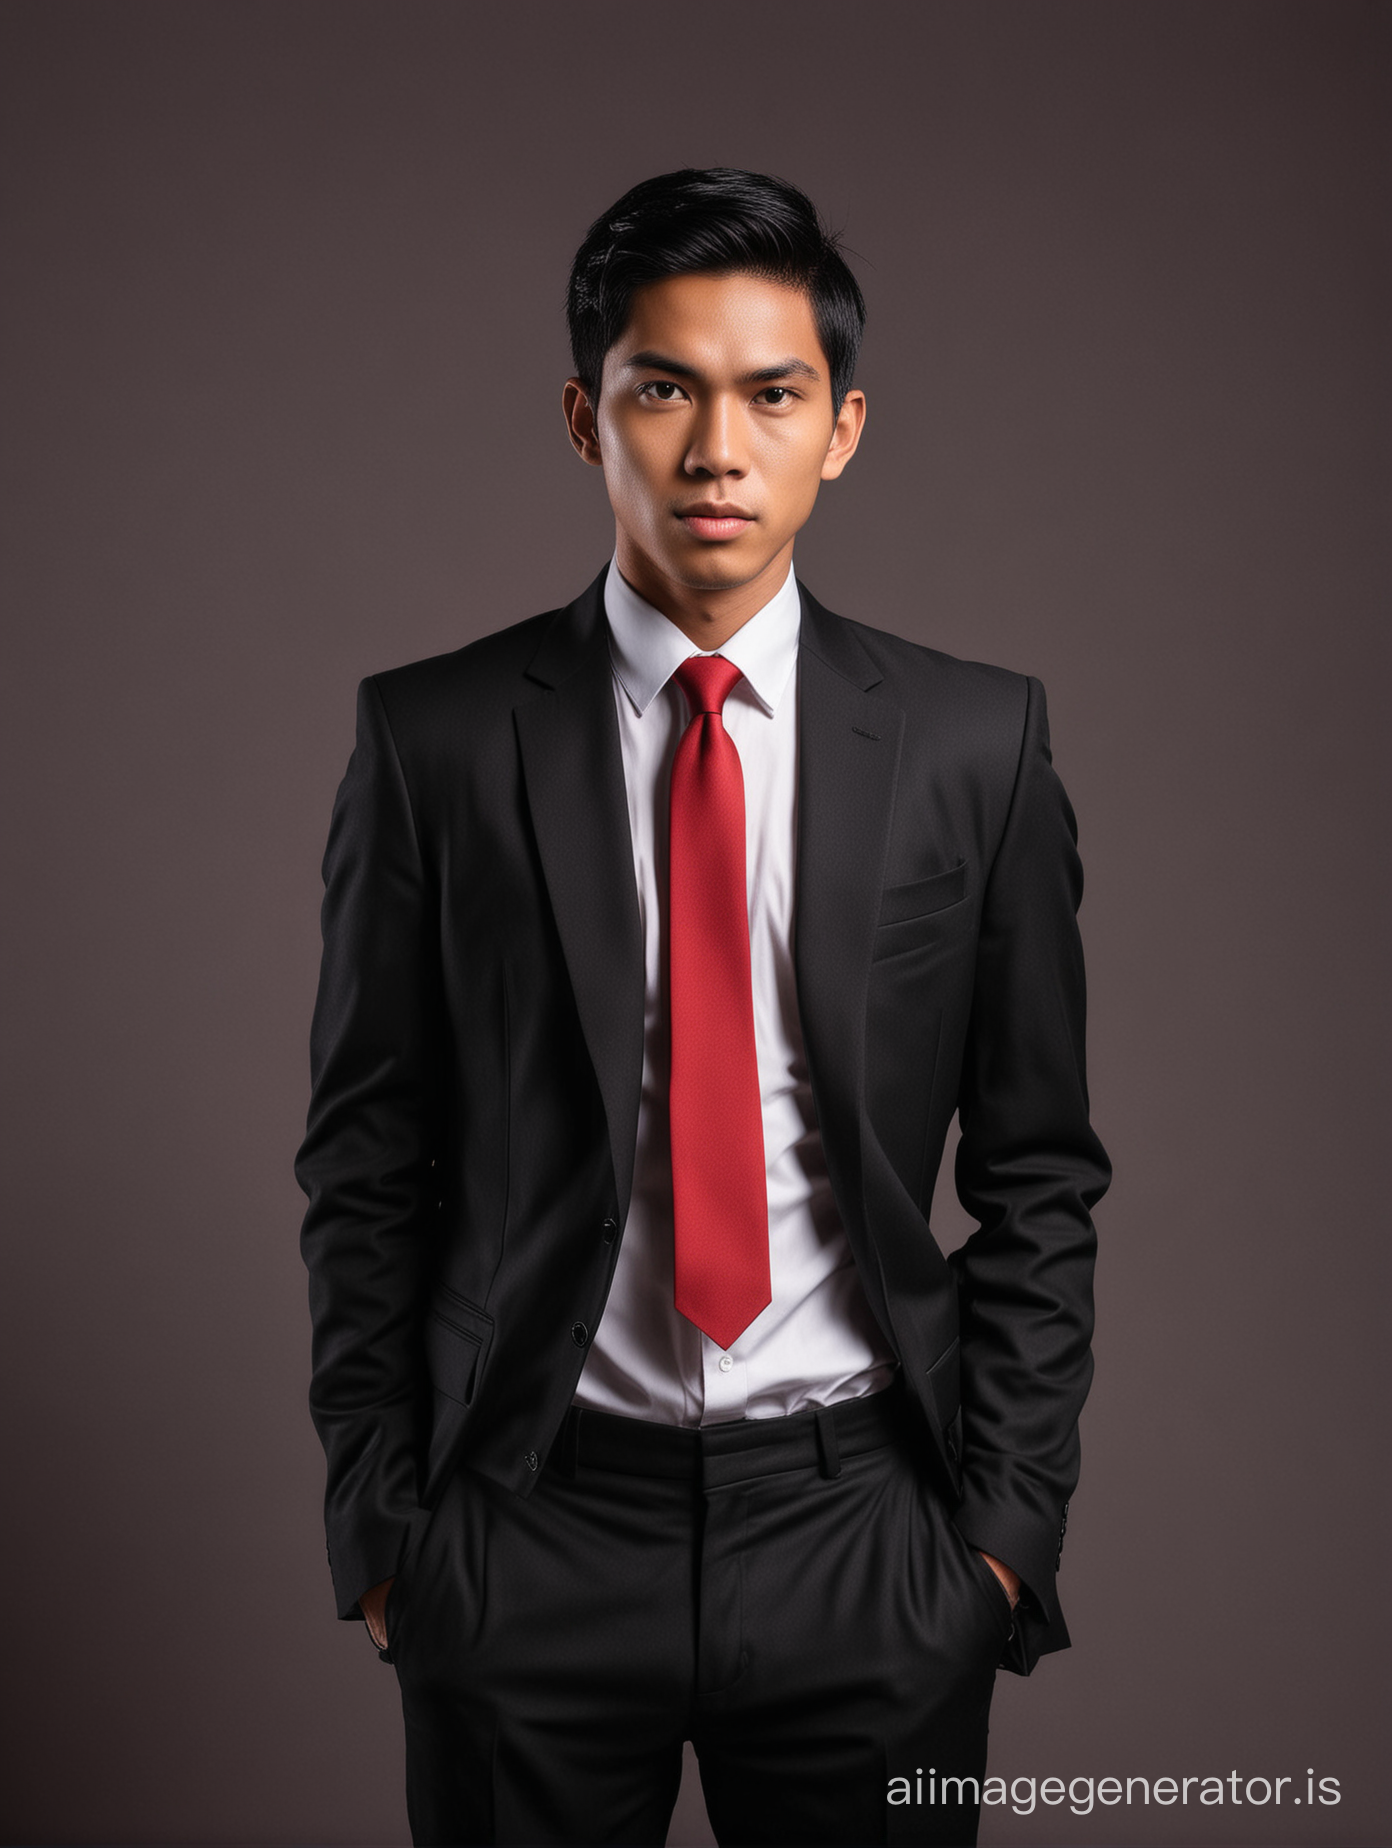 An indonesian handsome young man, black short hair, wearing black sut and black tie, with background striking red for postcard photo.. head and body look straight to the camera.. 